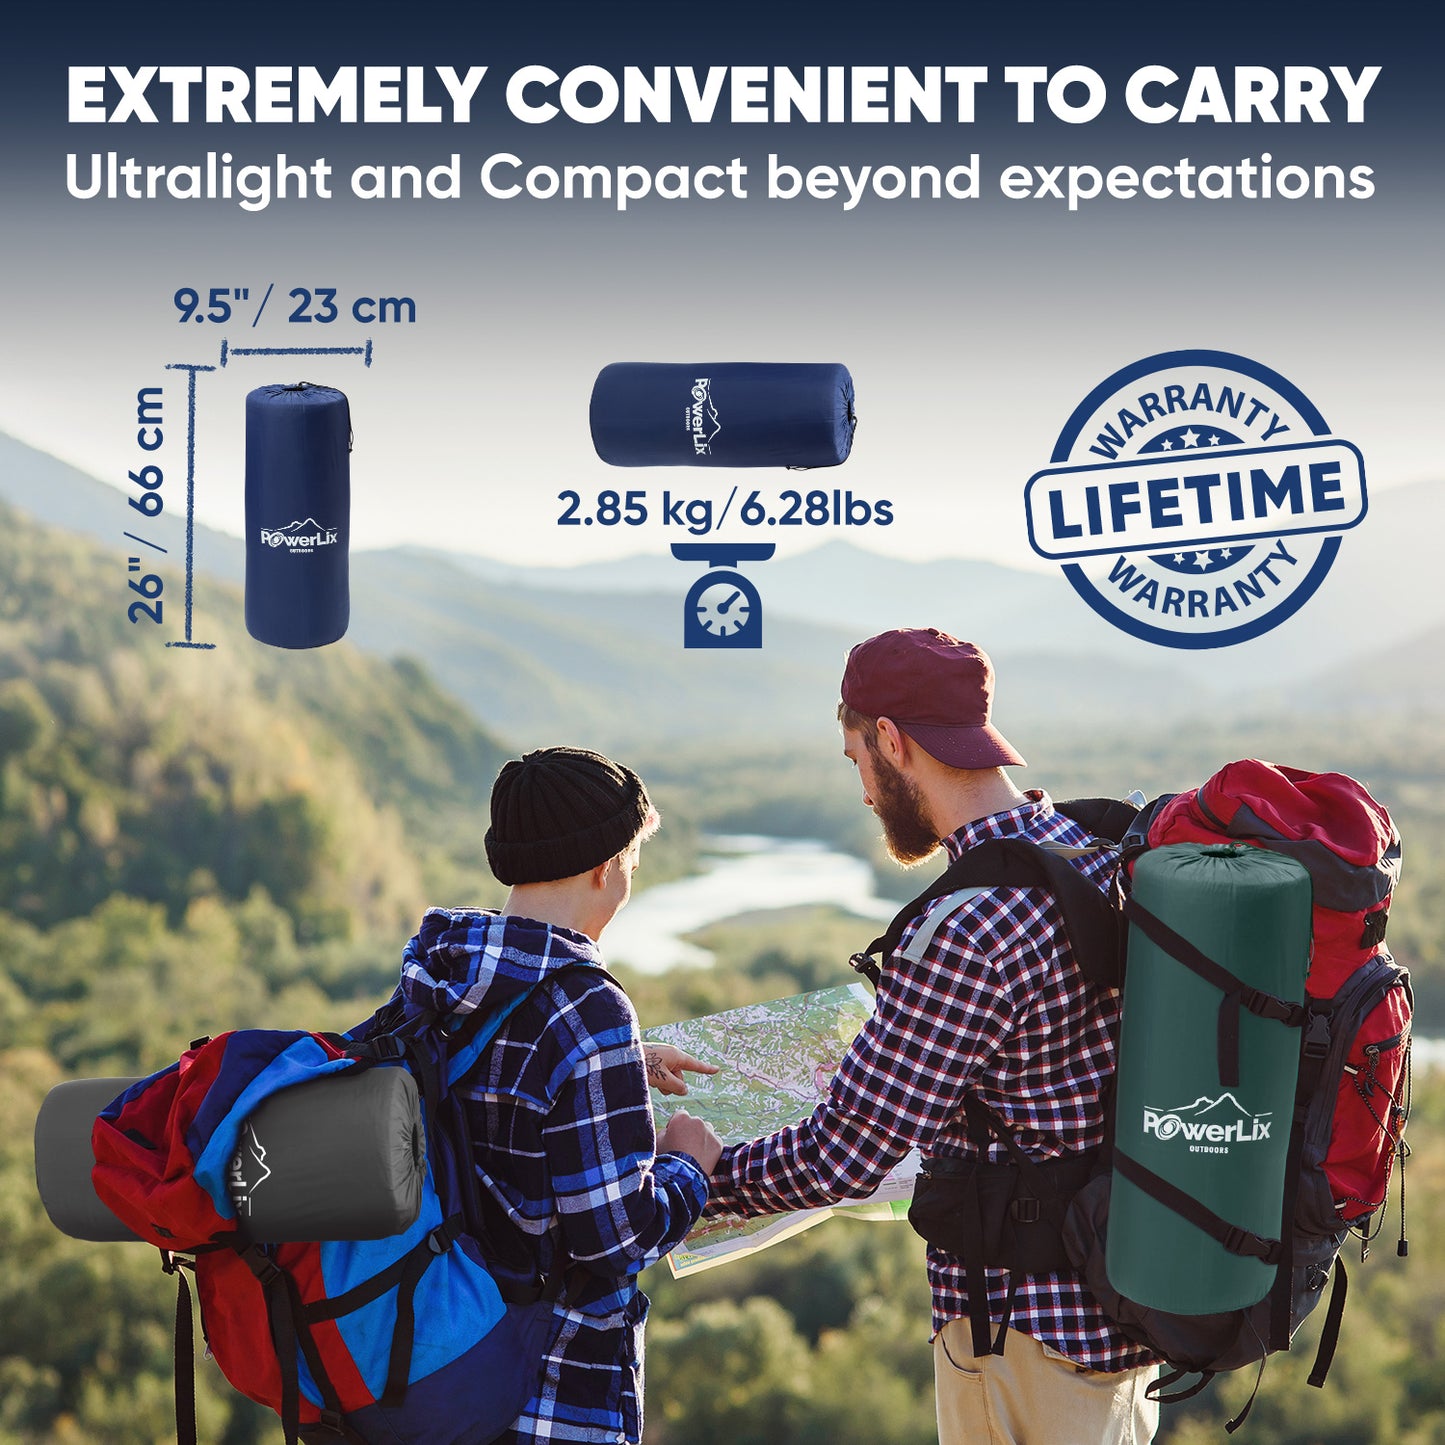 Two models hiking, each with a Powerlix sleeping pad strapped to their packs. The stored sleeping pad is displayed twice. The dimesions are listed as, "26"/66cm by 9.5"/23cm." The weight is listed as, "2.85kg/6.28lbs." The text beside is, "Lifetime warranty." Uper text reads, "Extremely convenient to carry. Ultralight and compact beyond expectations."